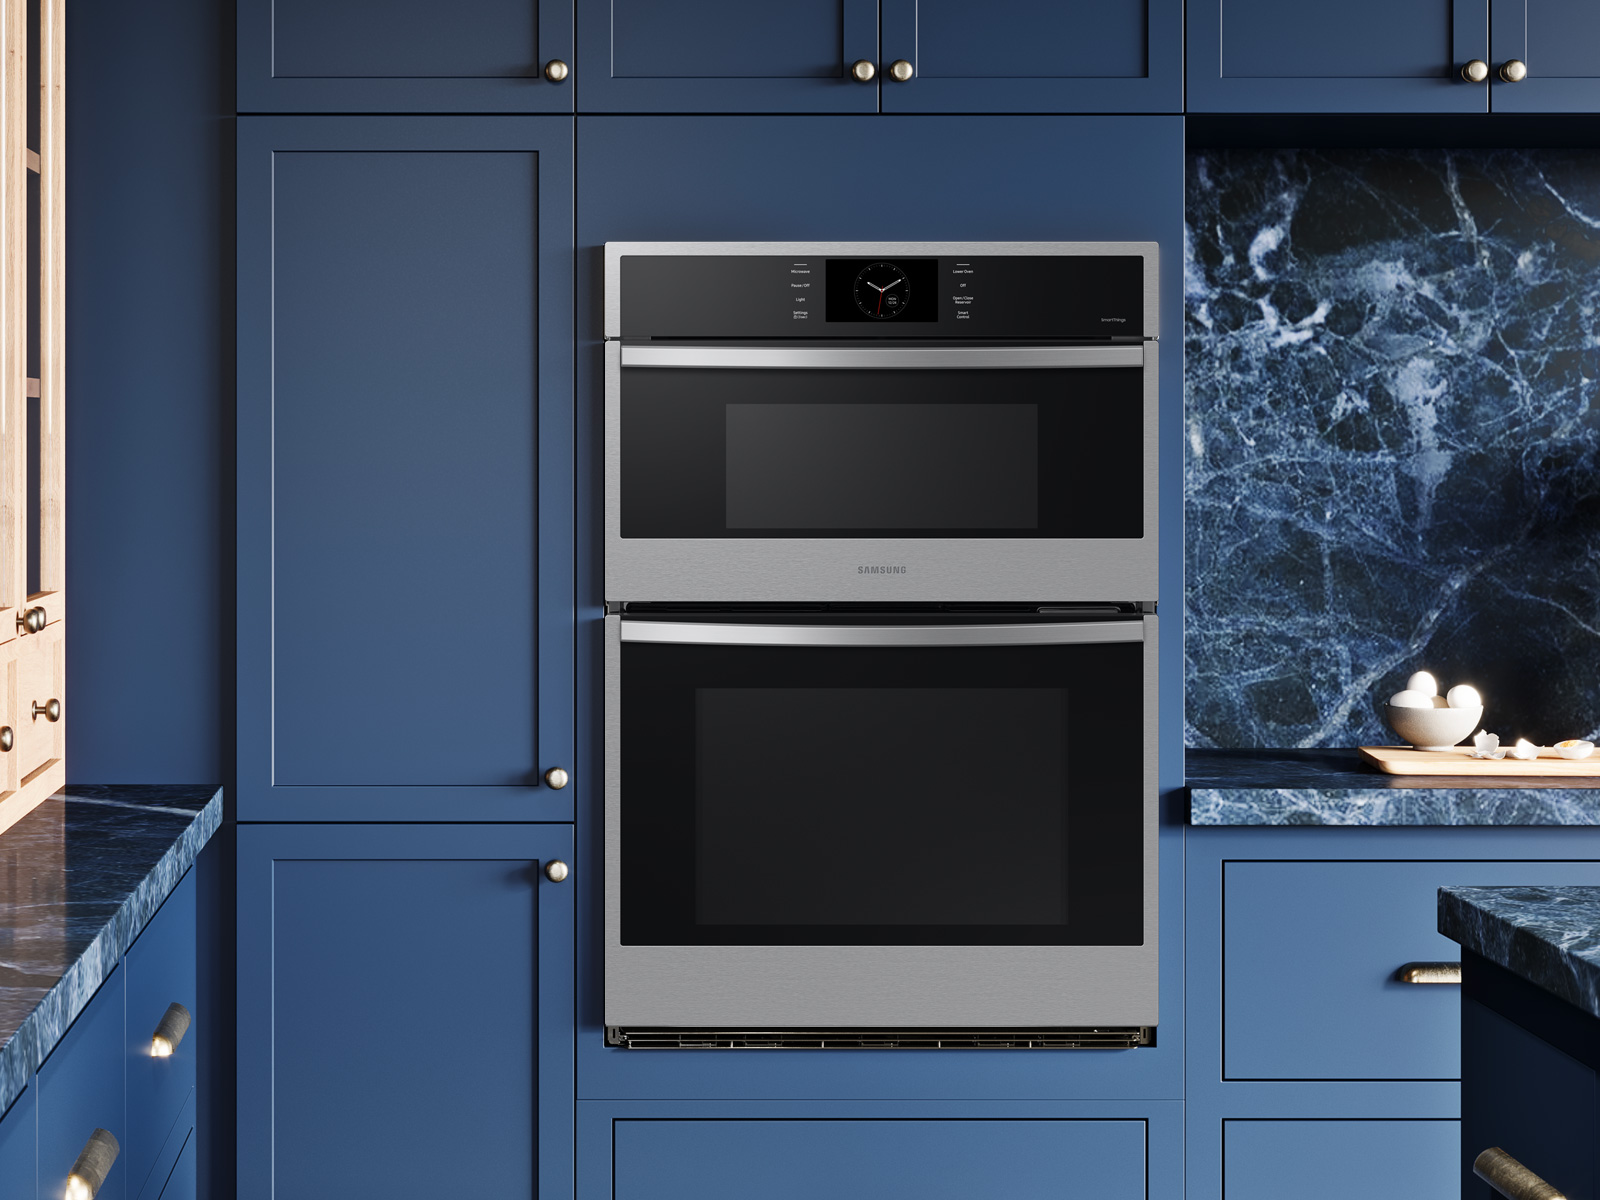 Samsung 30 Microwave Combination Wall Oven with Steam Cook